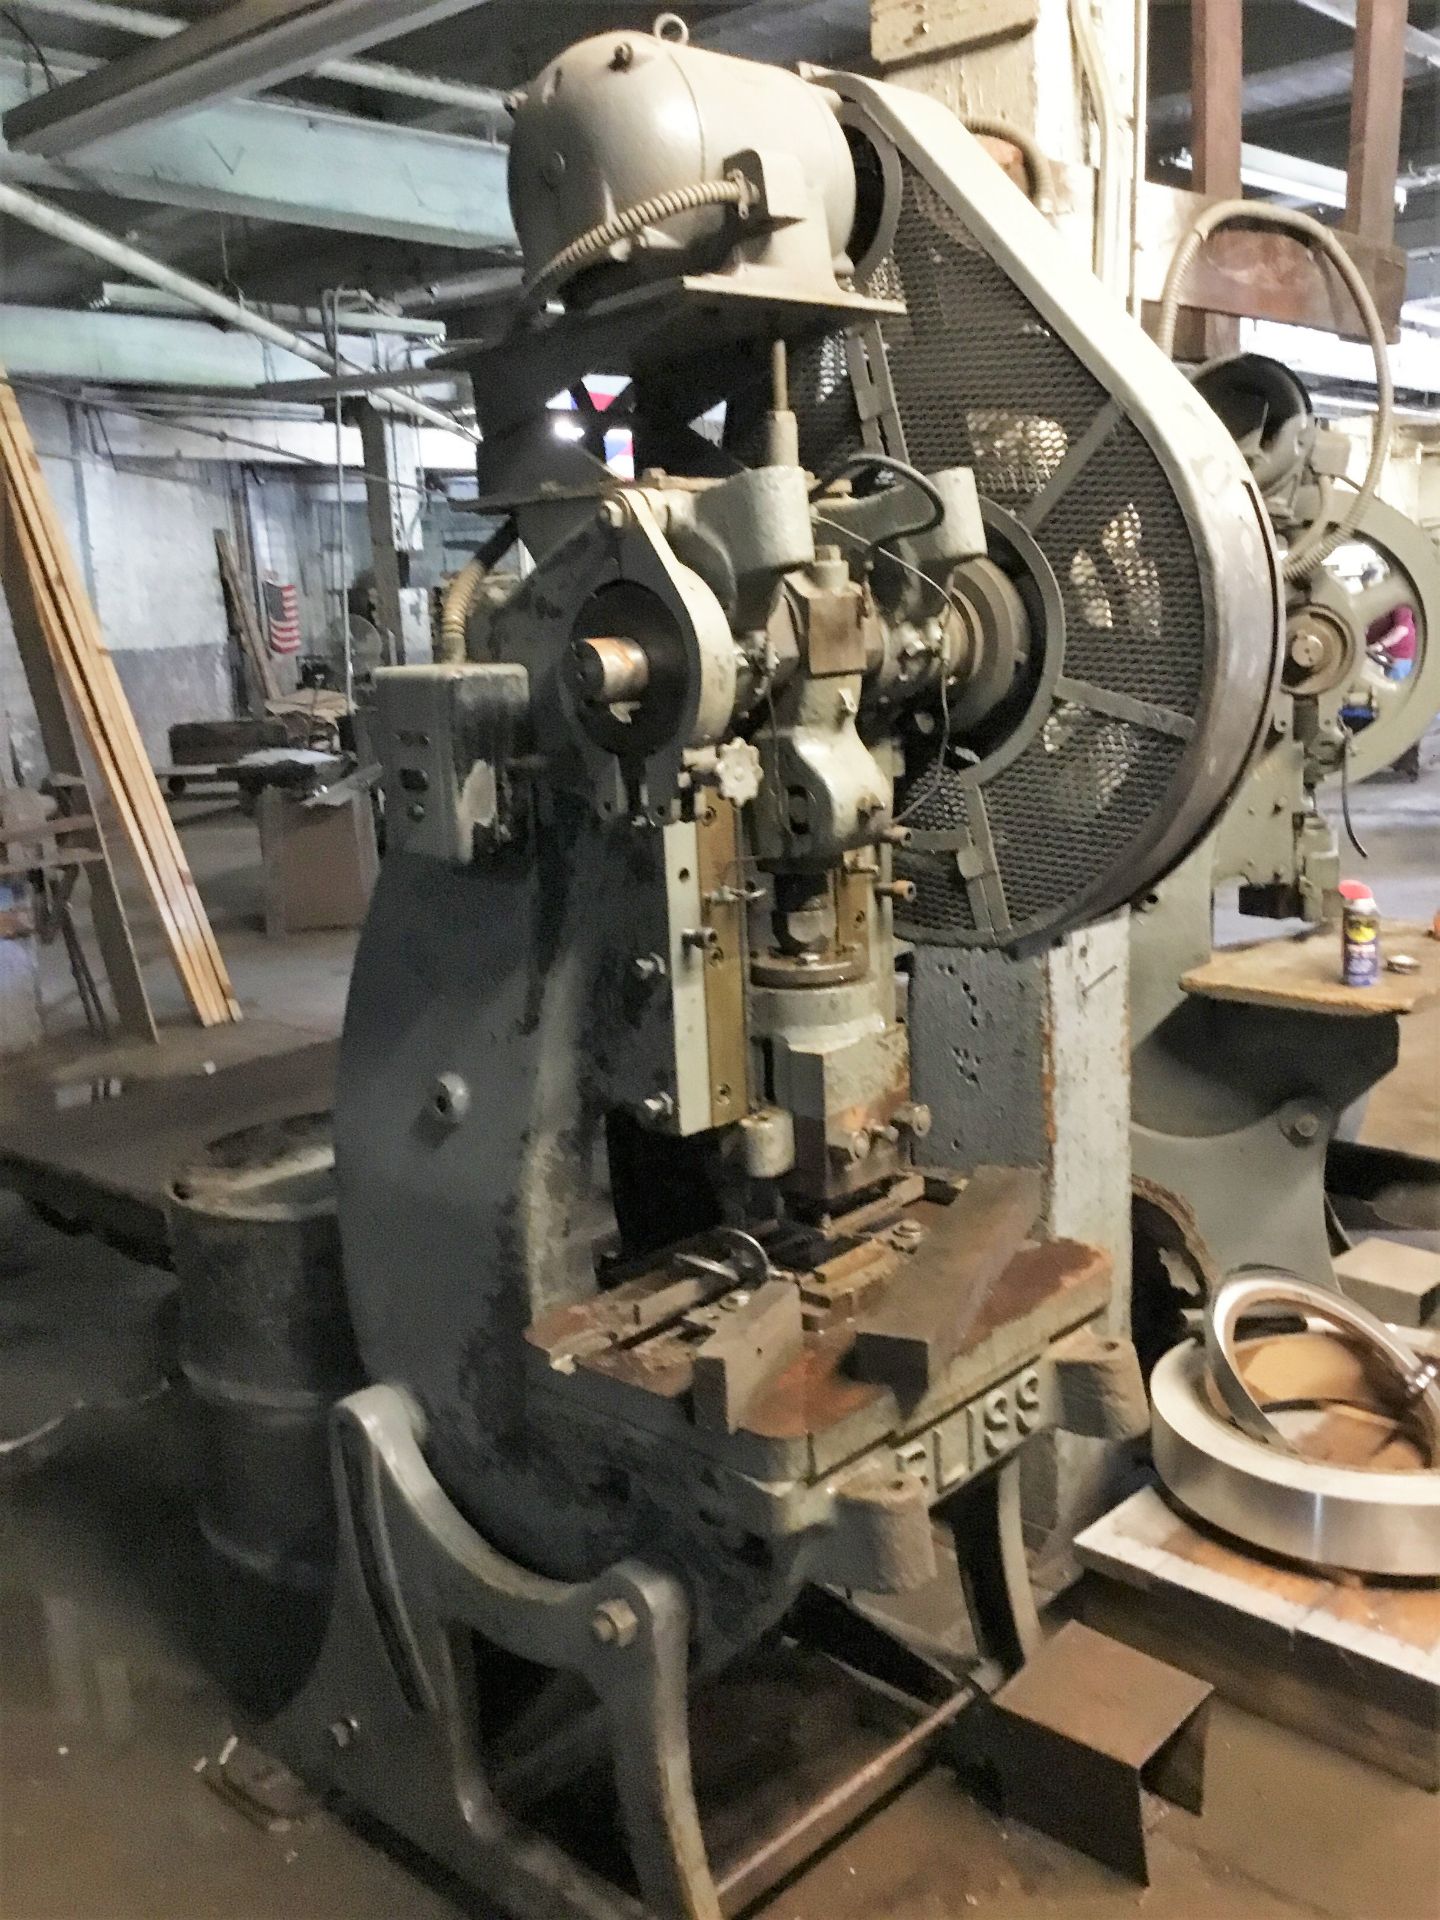 BLISS MDL. #20C 32 TON MECHANICAL CLUTCH FLYWHEEL TYPE OBI PRESS, WITH 18-1/2” X 26-1/2” BED, 2-1/2”